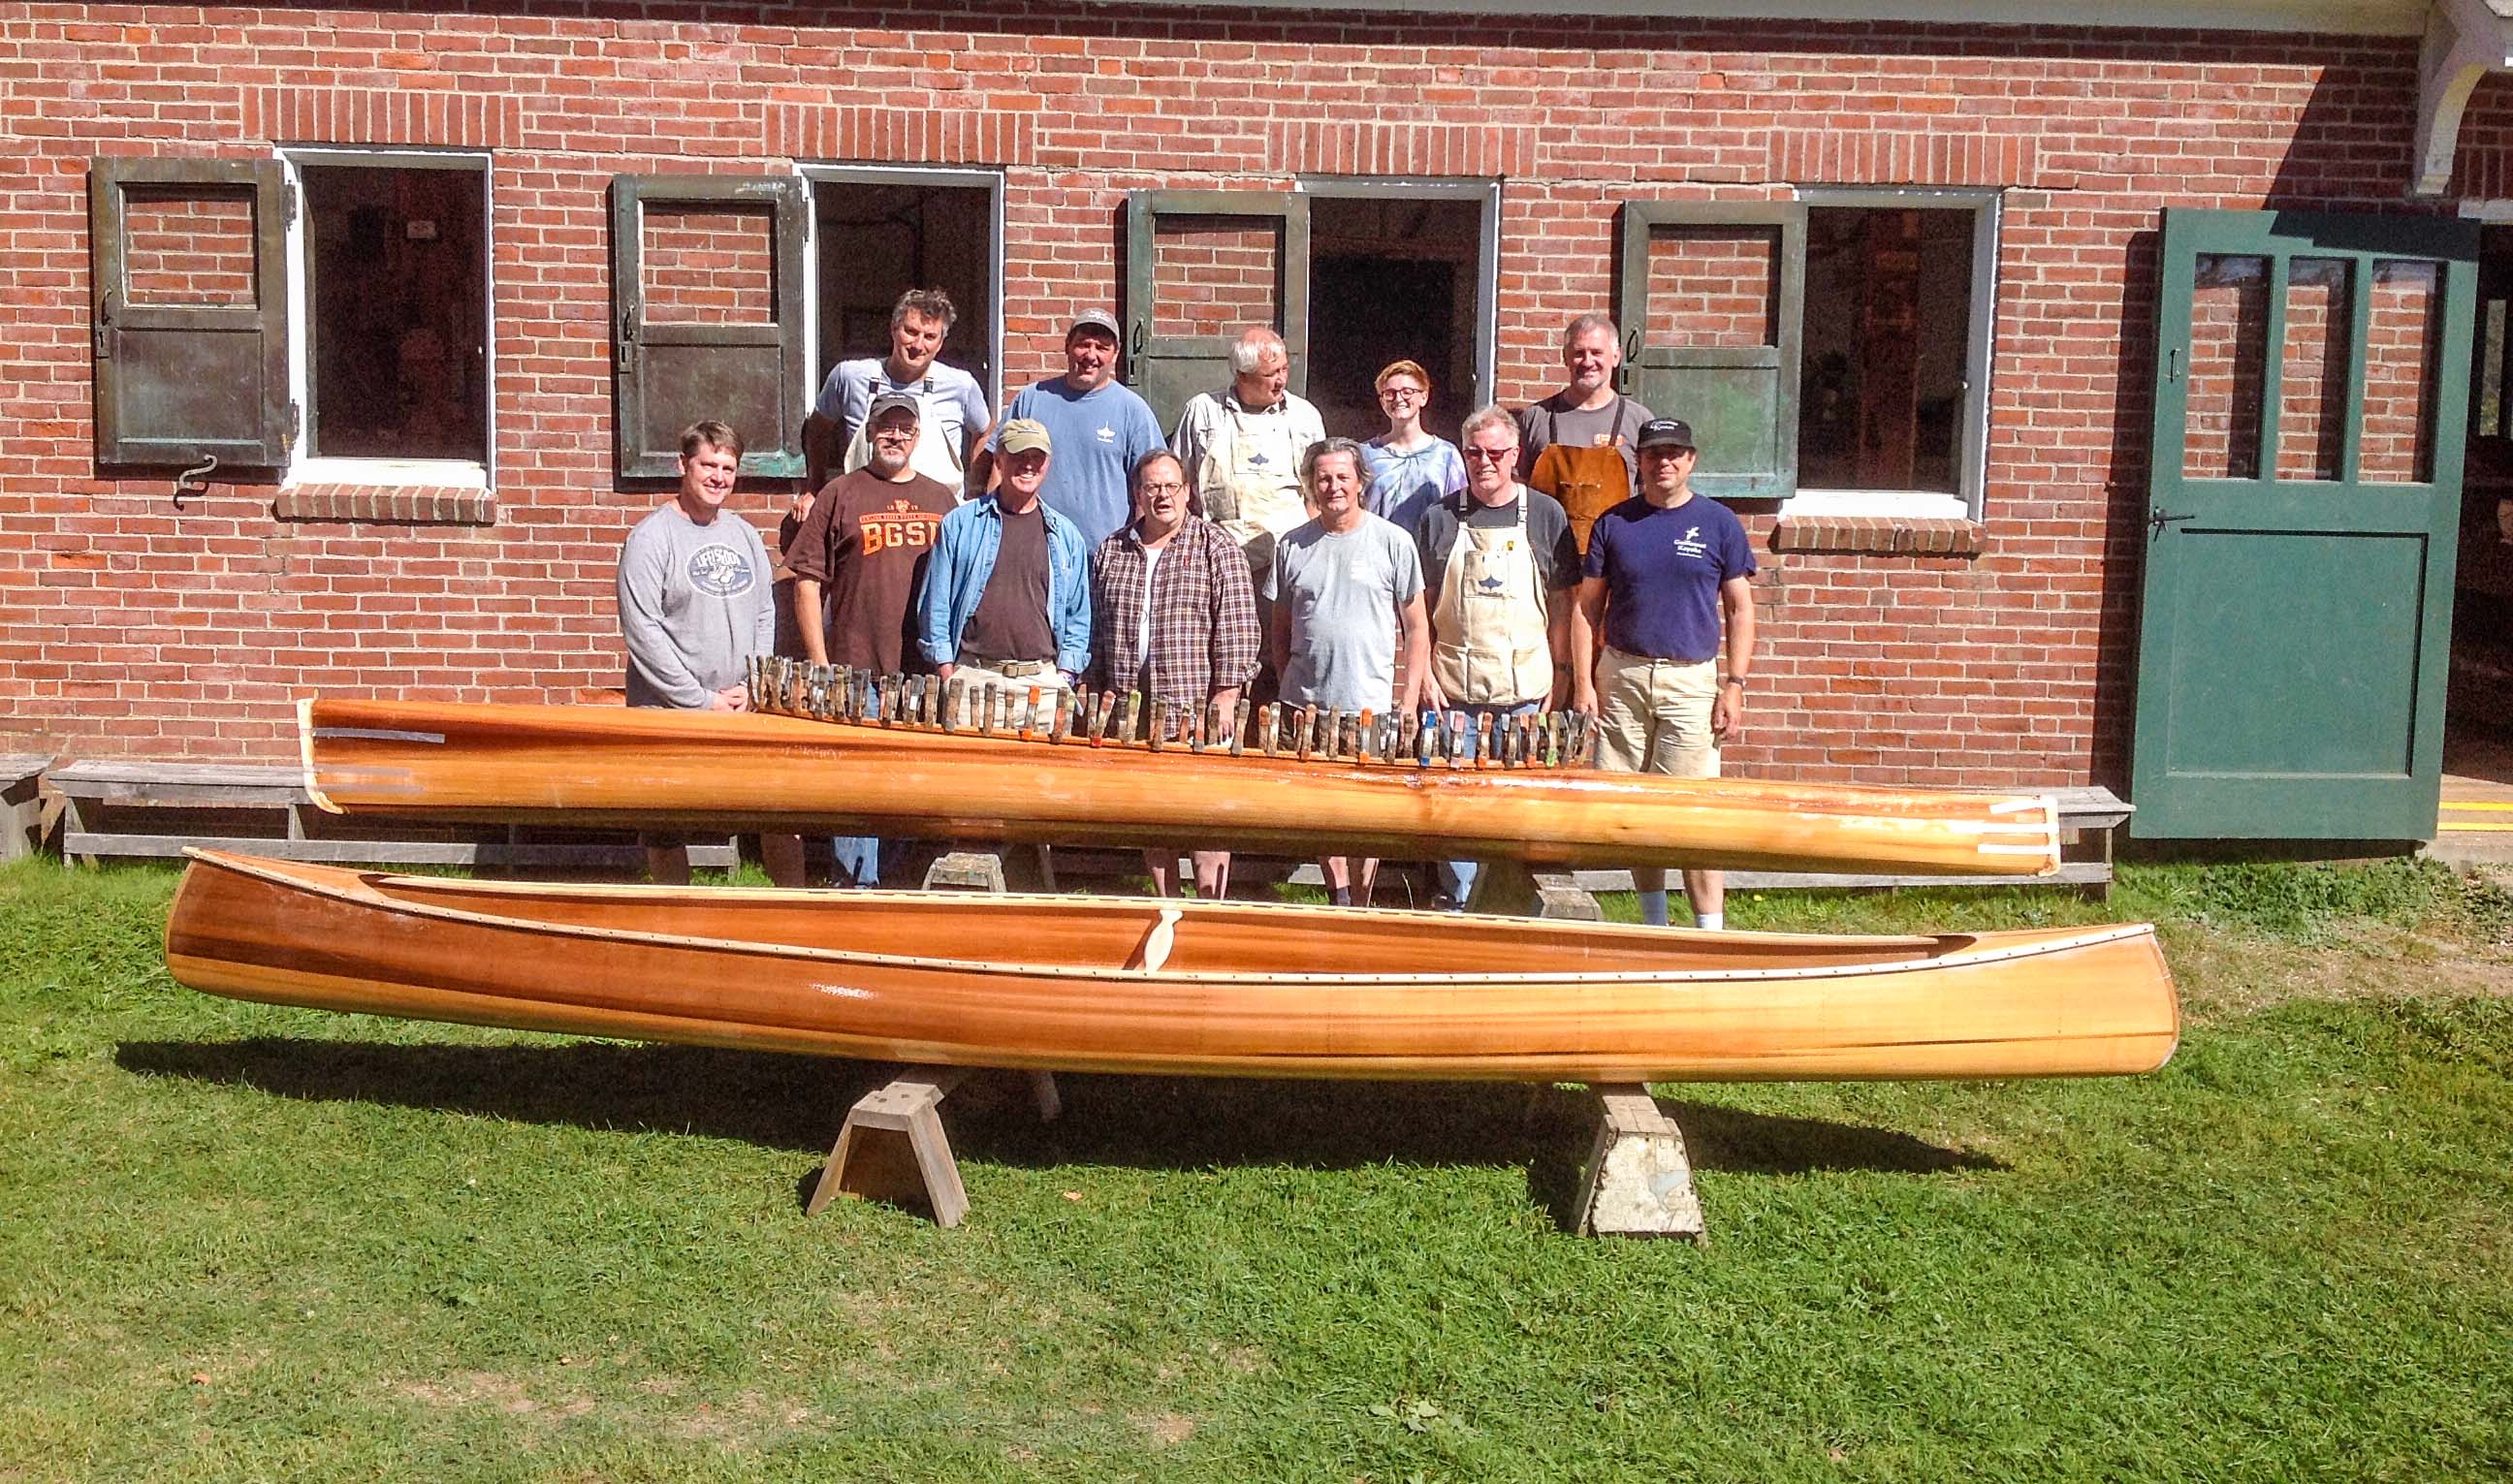 Fine Strip Planked Boats Class @ WoodenBoat